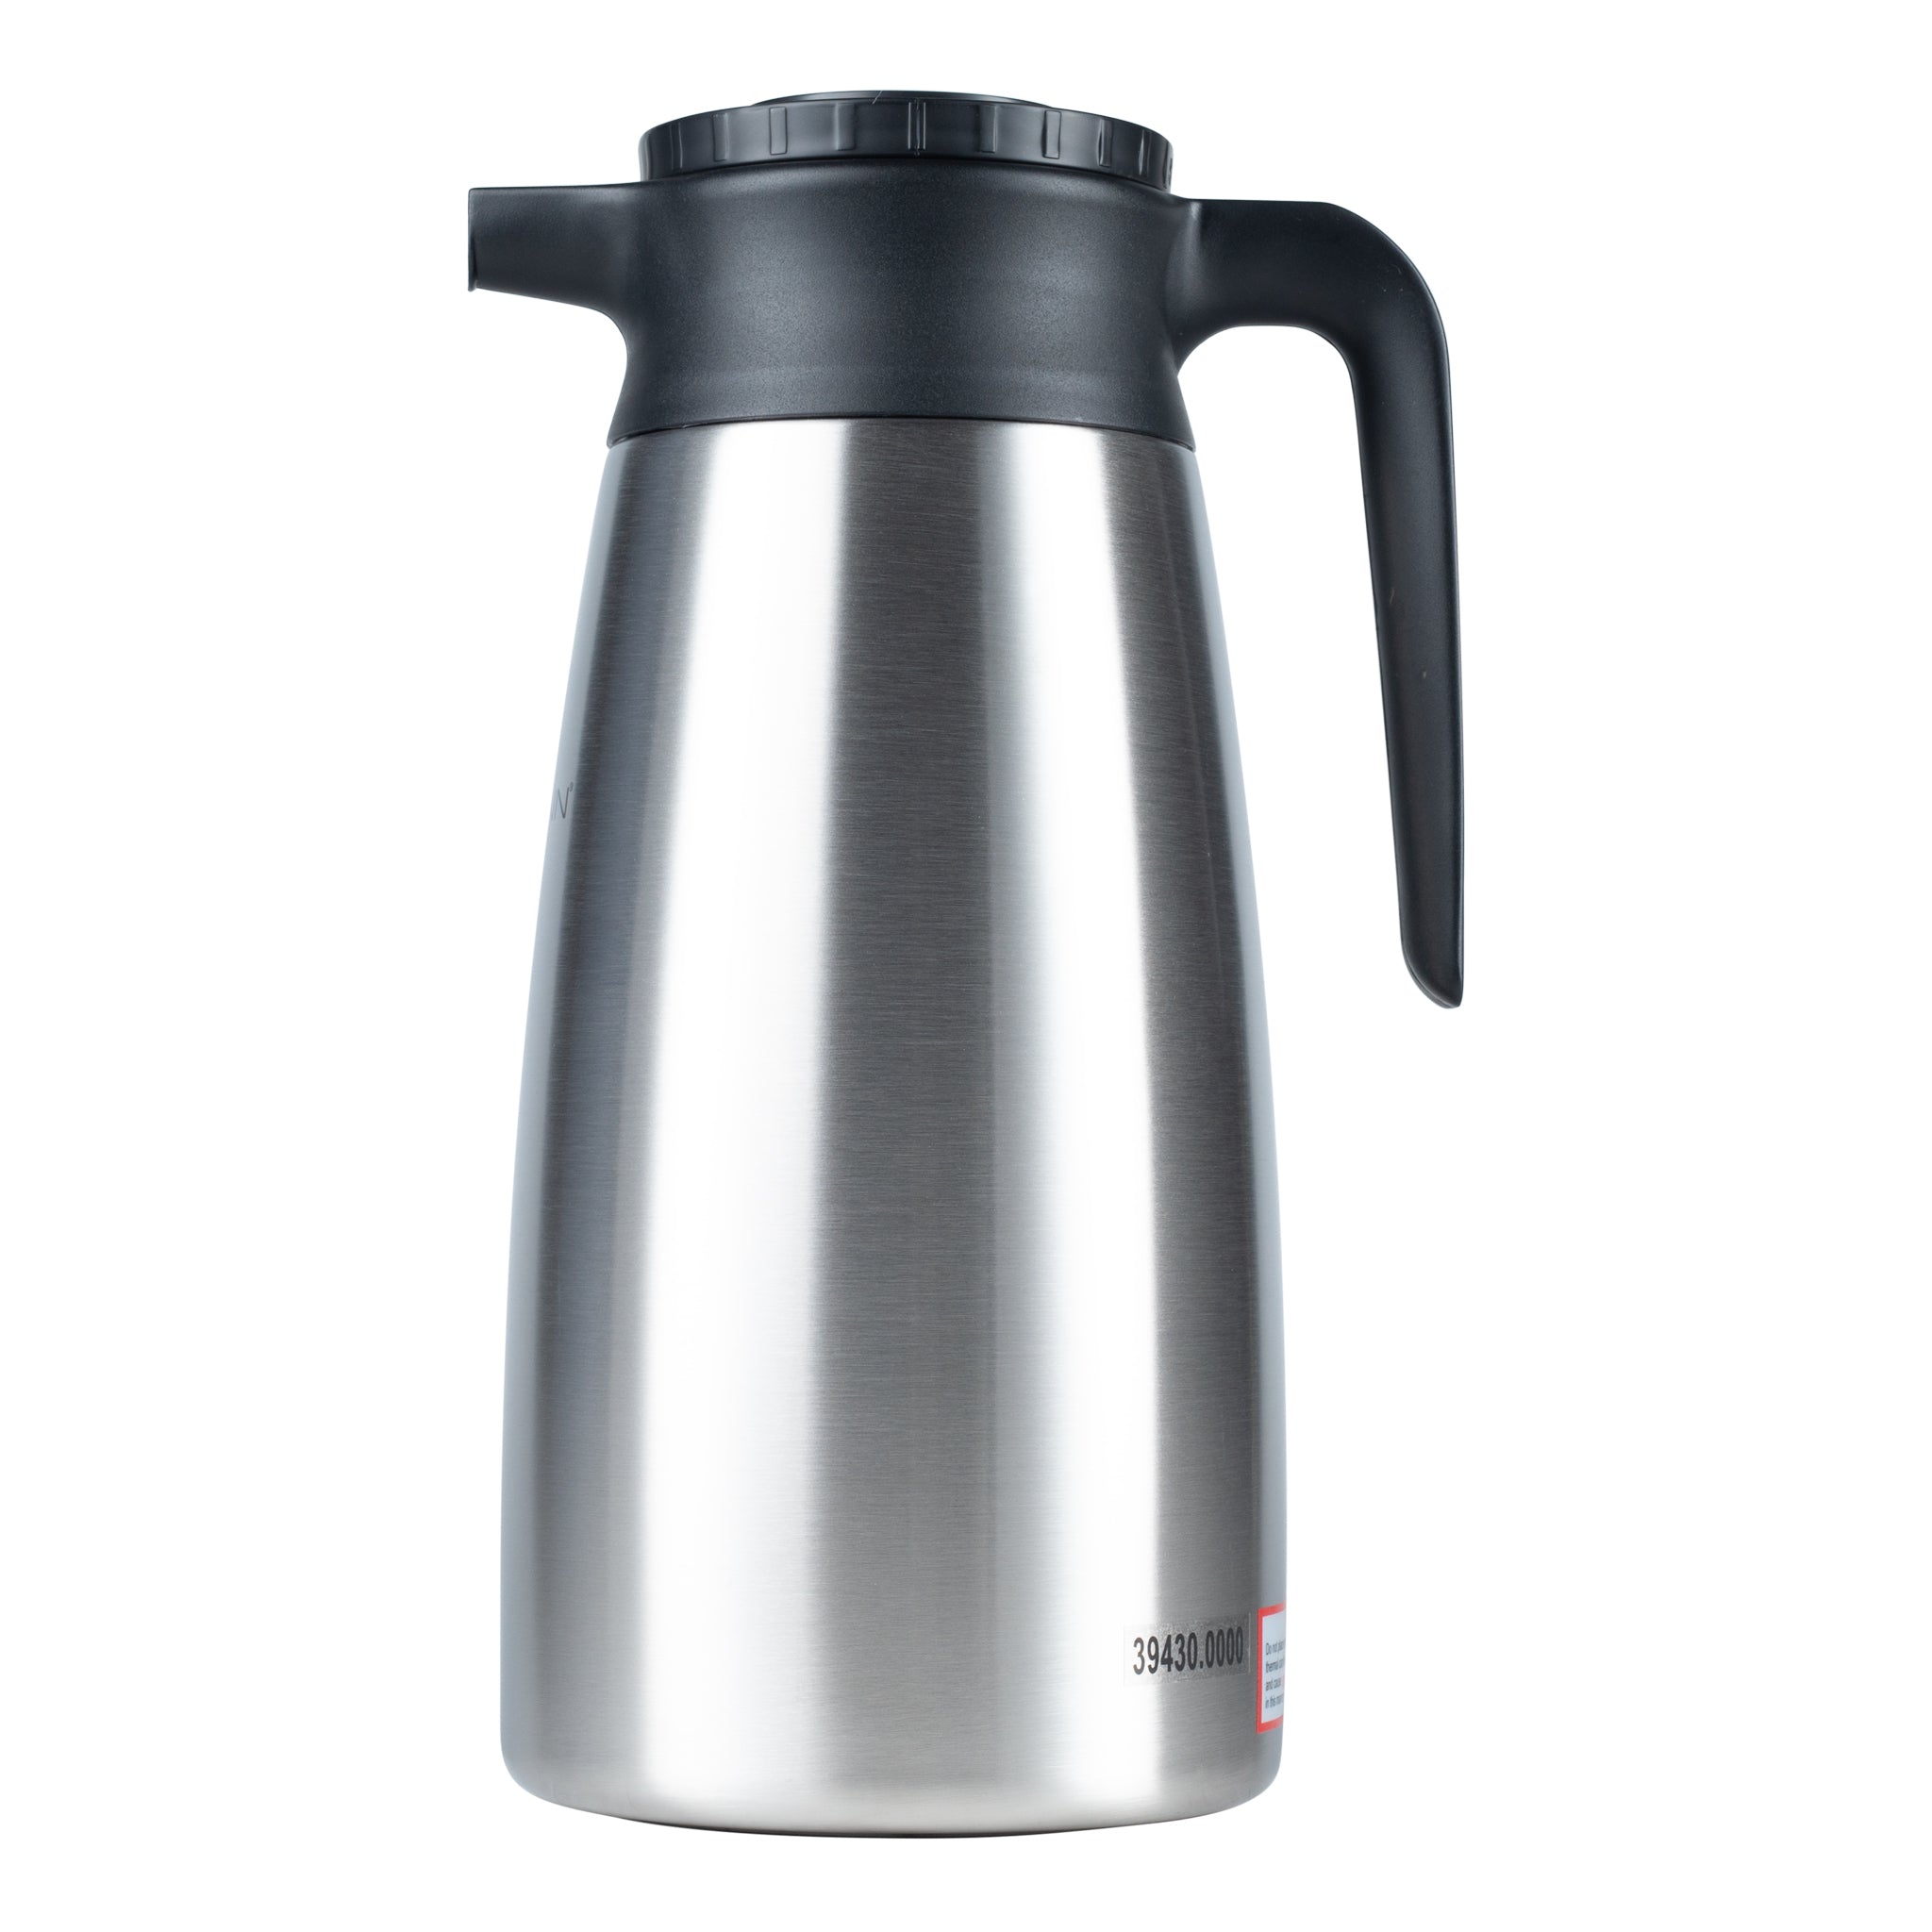 Thermos FN361 20 oz. Stainless Steel Vacuum Insulated Carafe